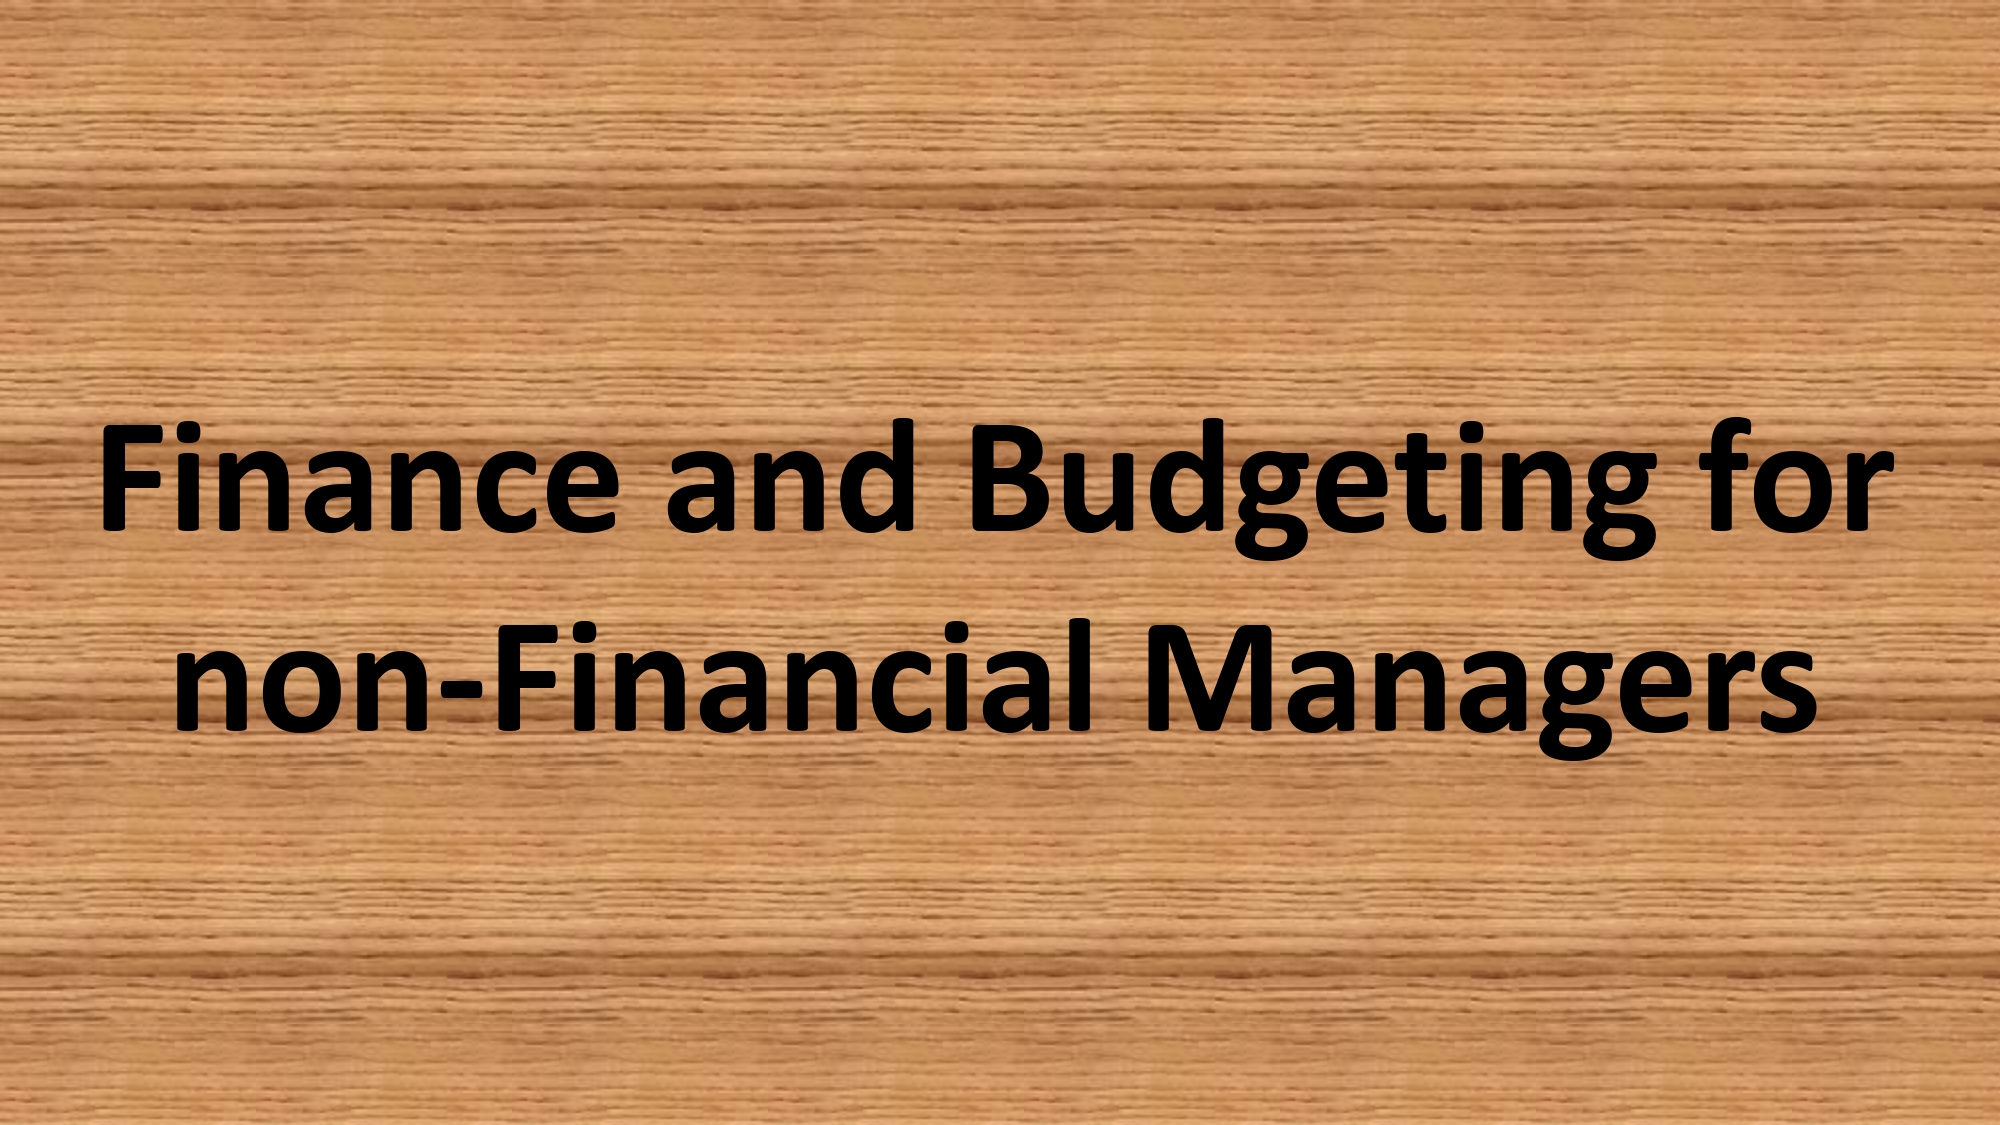 Finance and Budgeting for non-financial Managers    